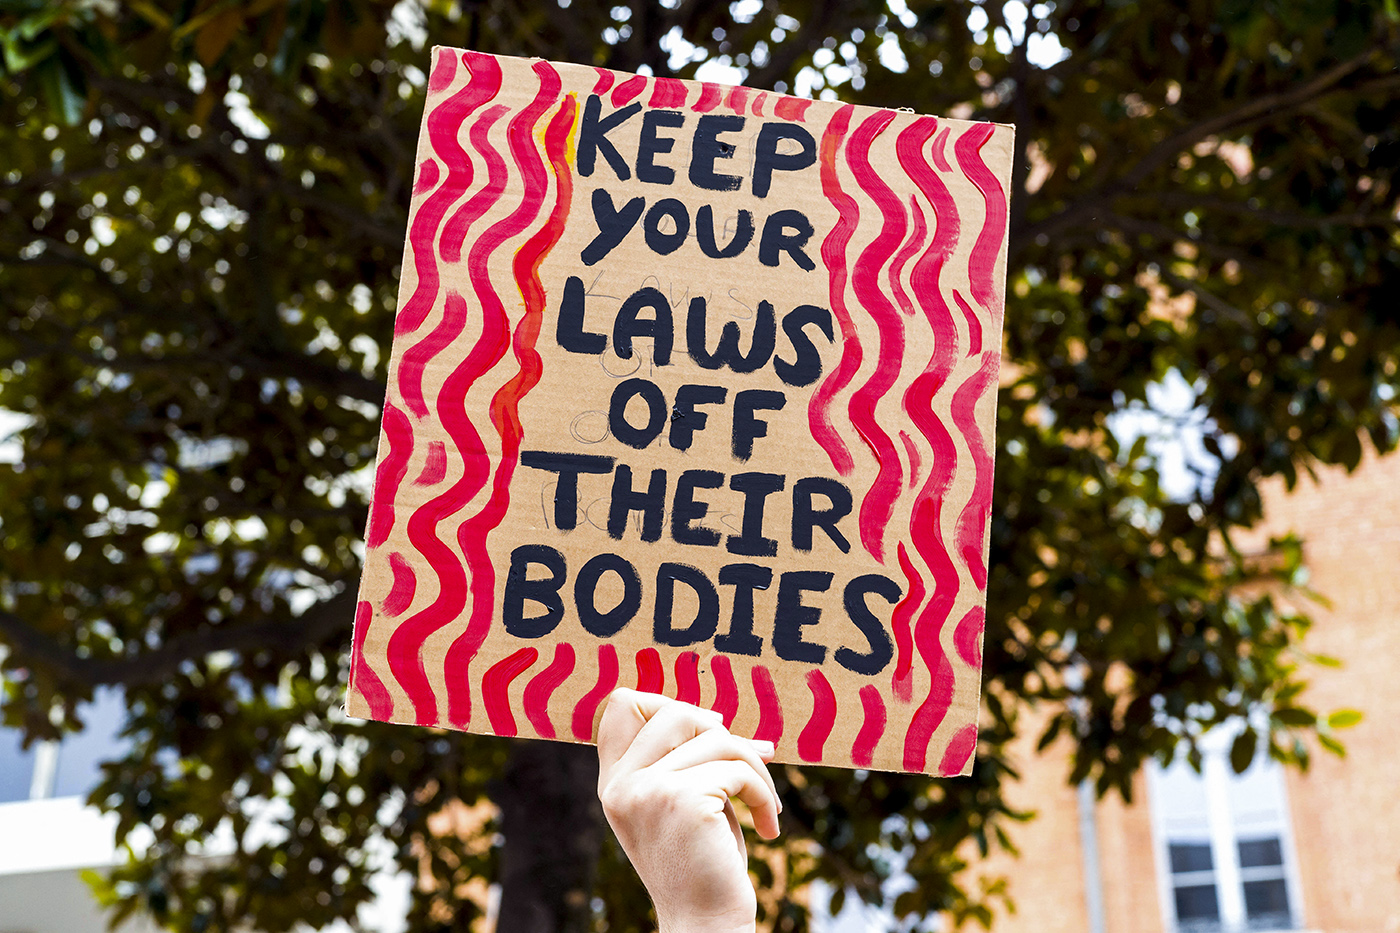 protest sign that says 'keep your laws off their bodies'